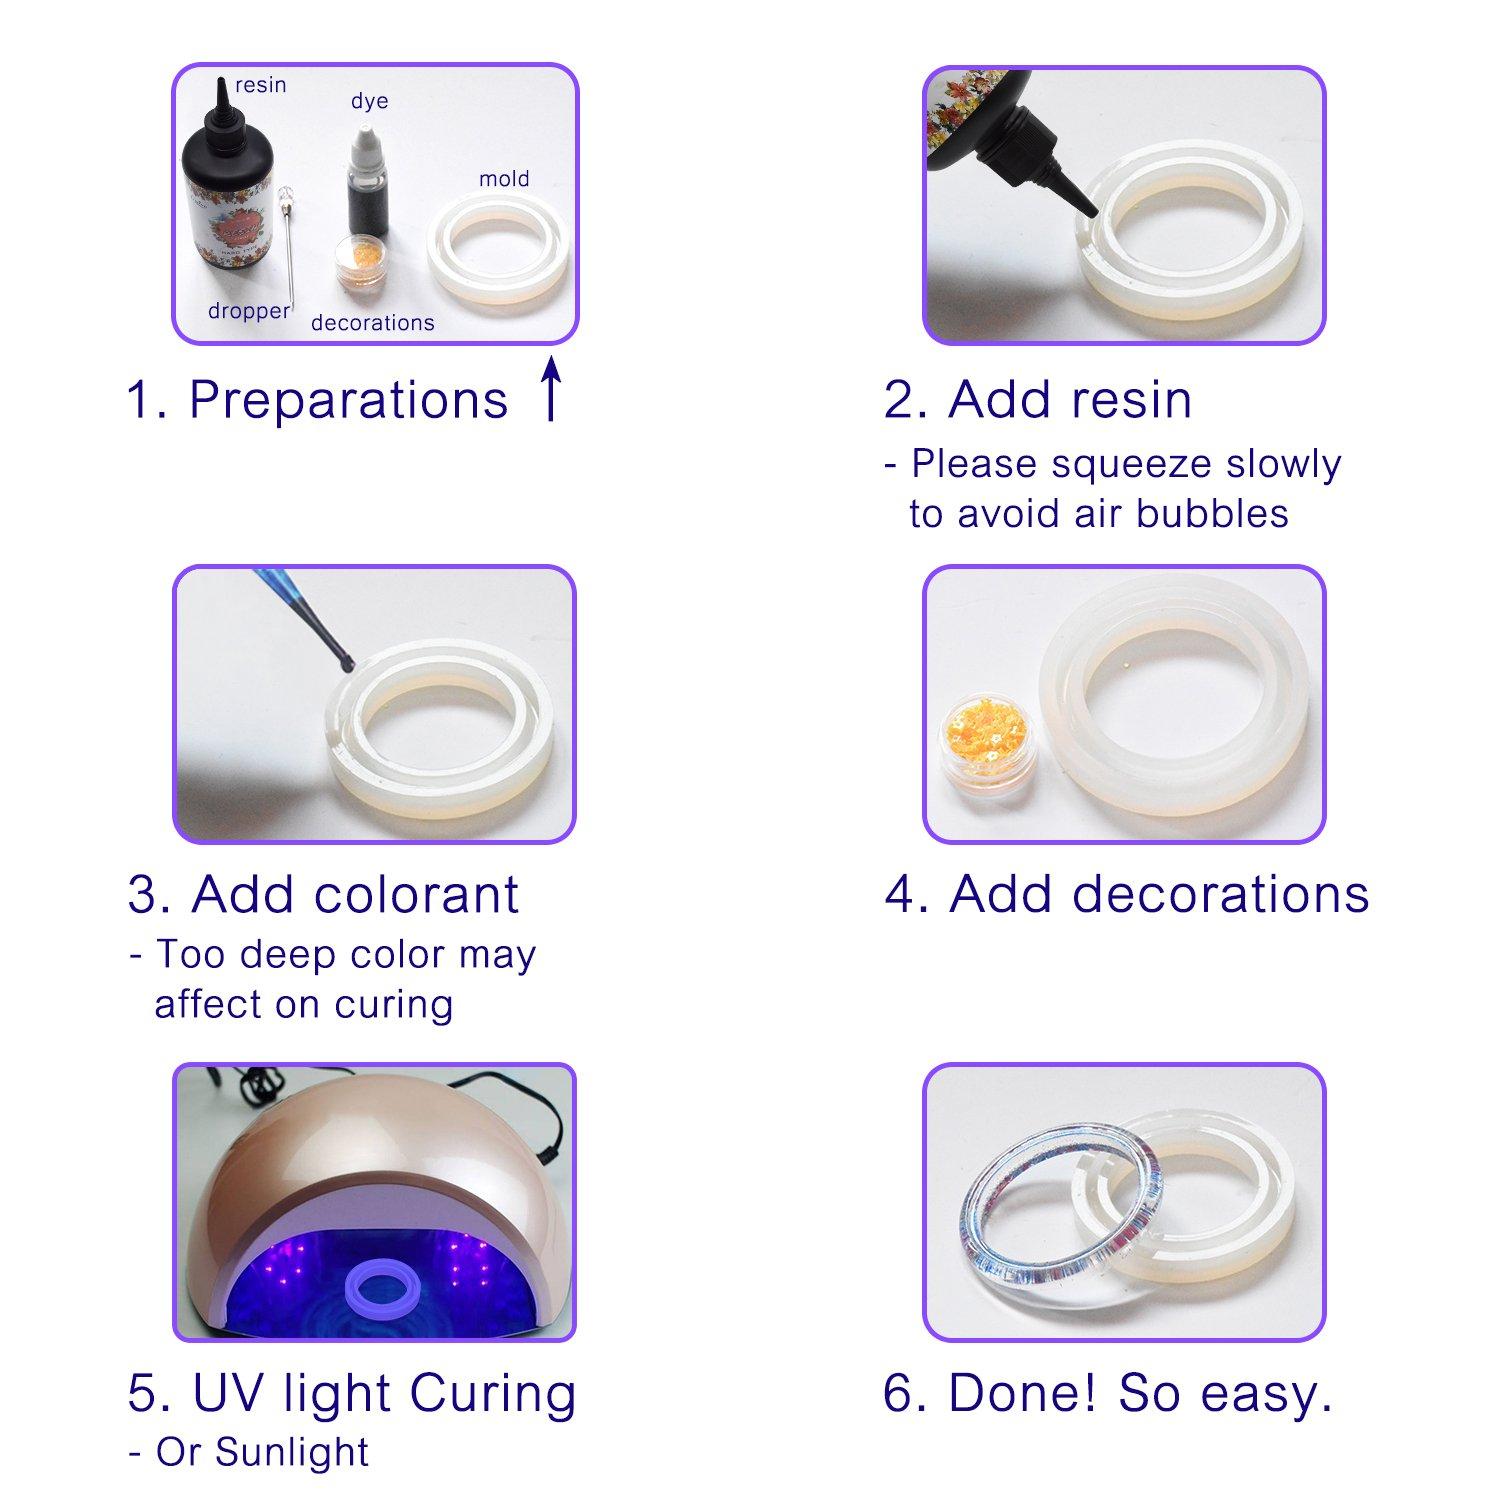 UV Resin - 200g Upgrade Crystal Clear Hard Glue Ultraviolet Curing Epoxy  Resin for Jewelry Making, Pendant, DIY Crafts - Transparent Solar Cure